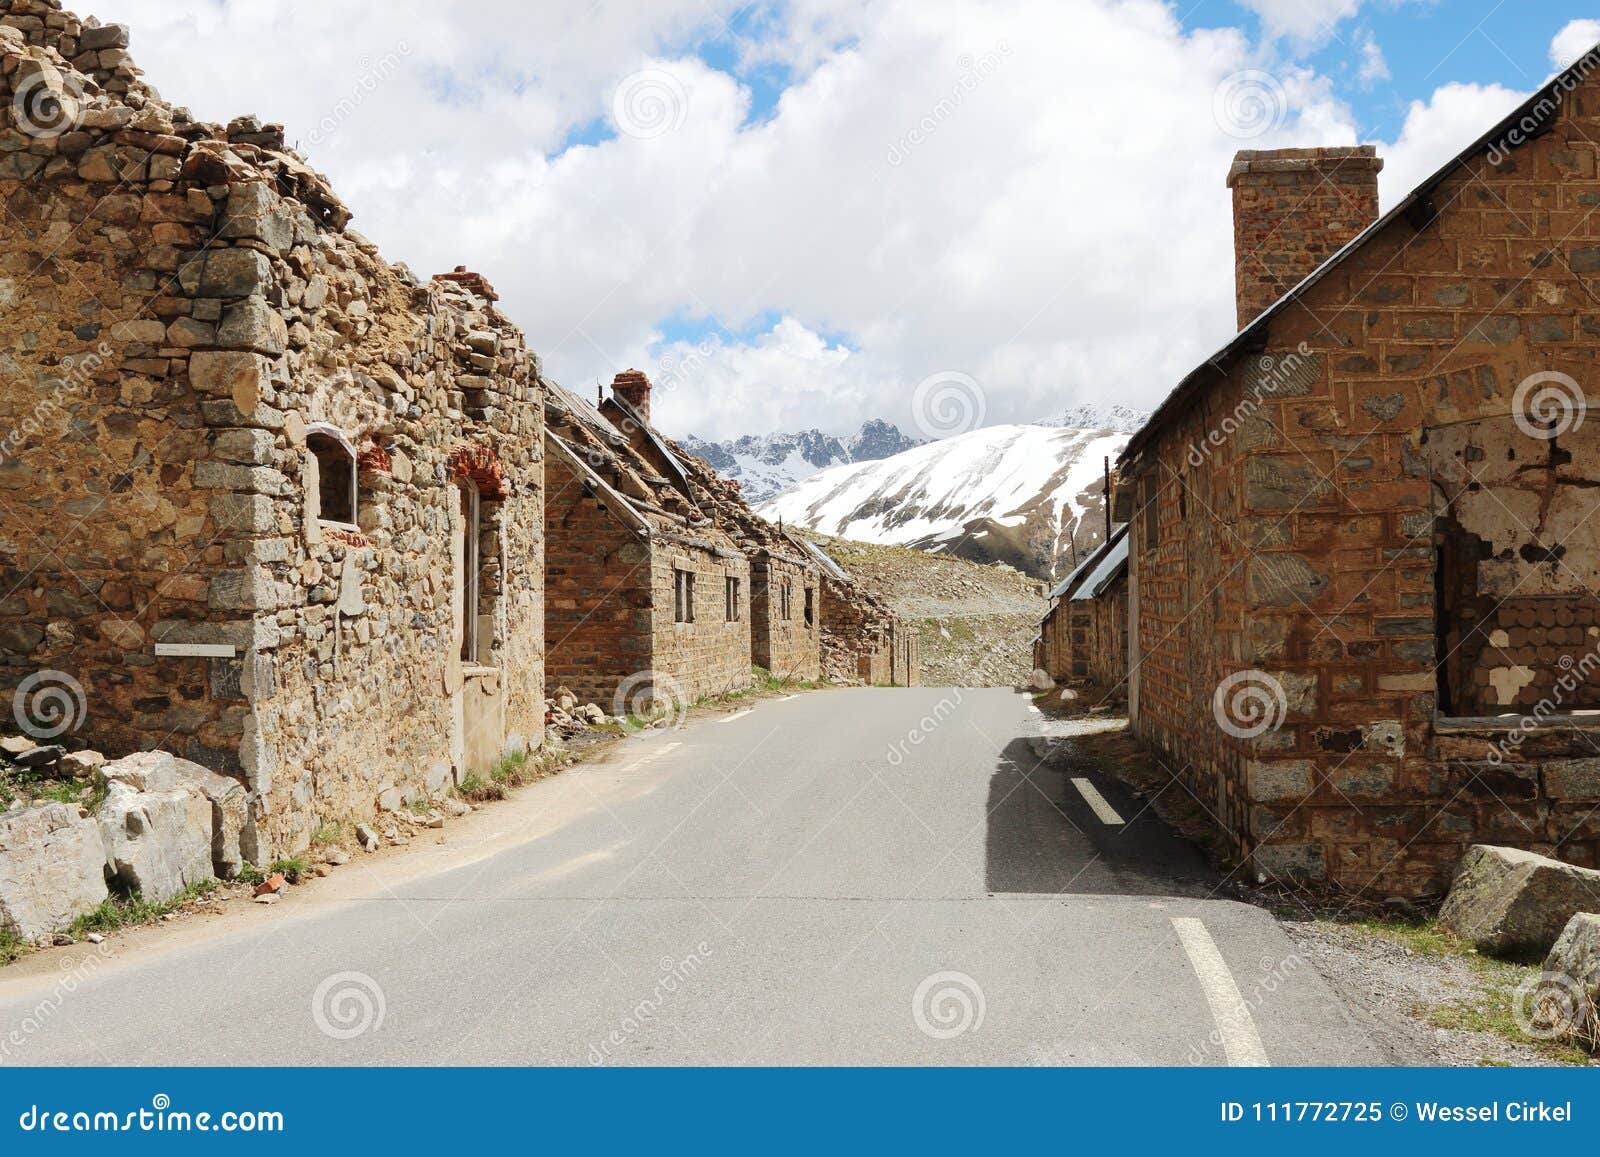 camp des fourches, military ruins, maritime alps, france